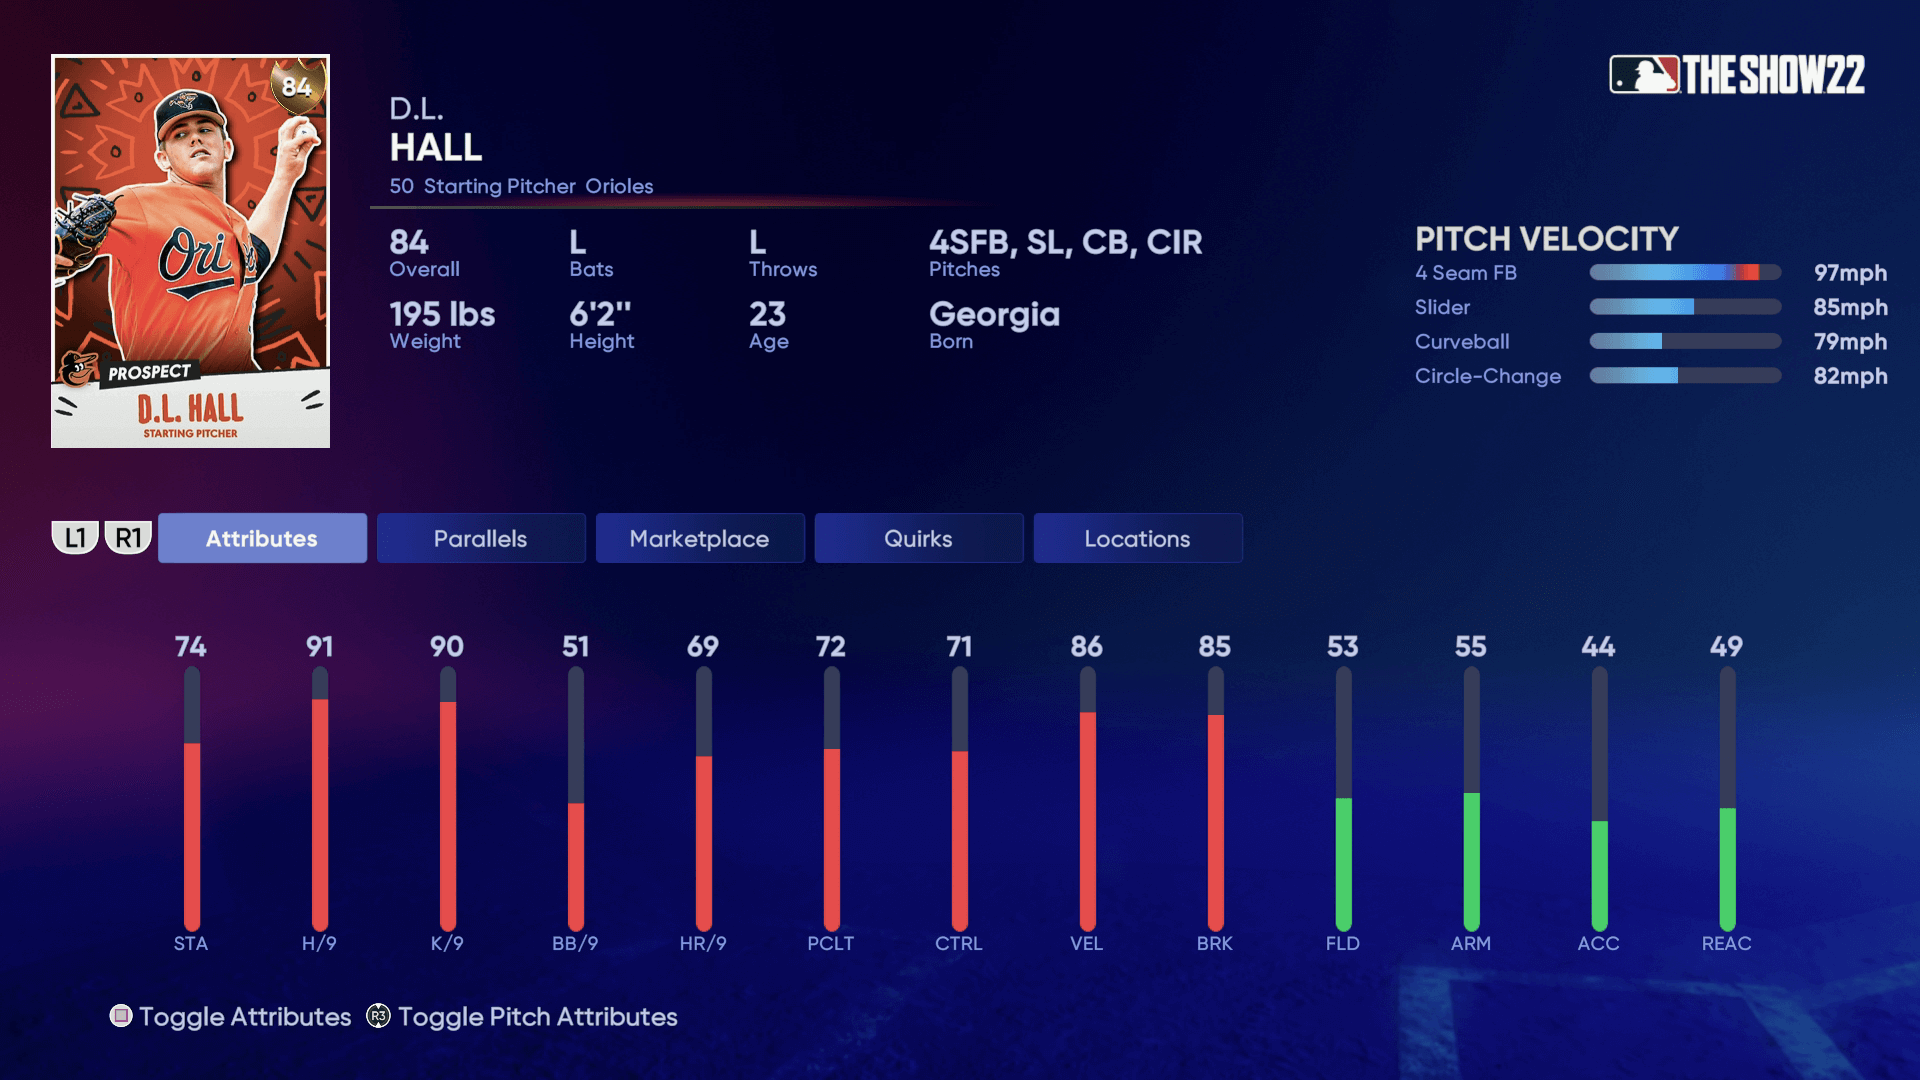 MLB The Show 23: How to complete Reds City Connect Conquest and